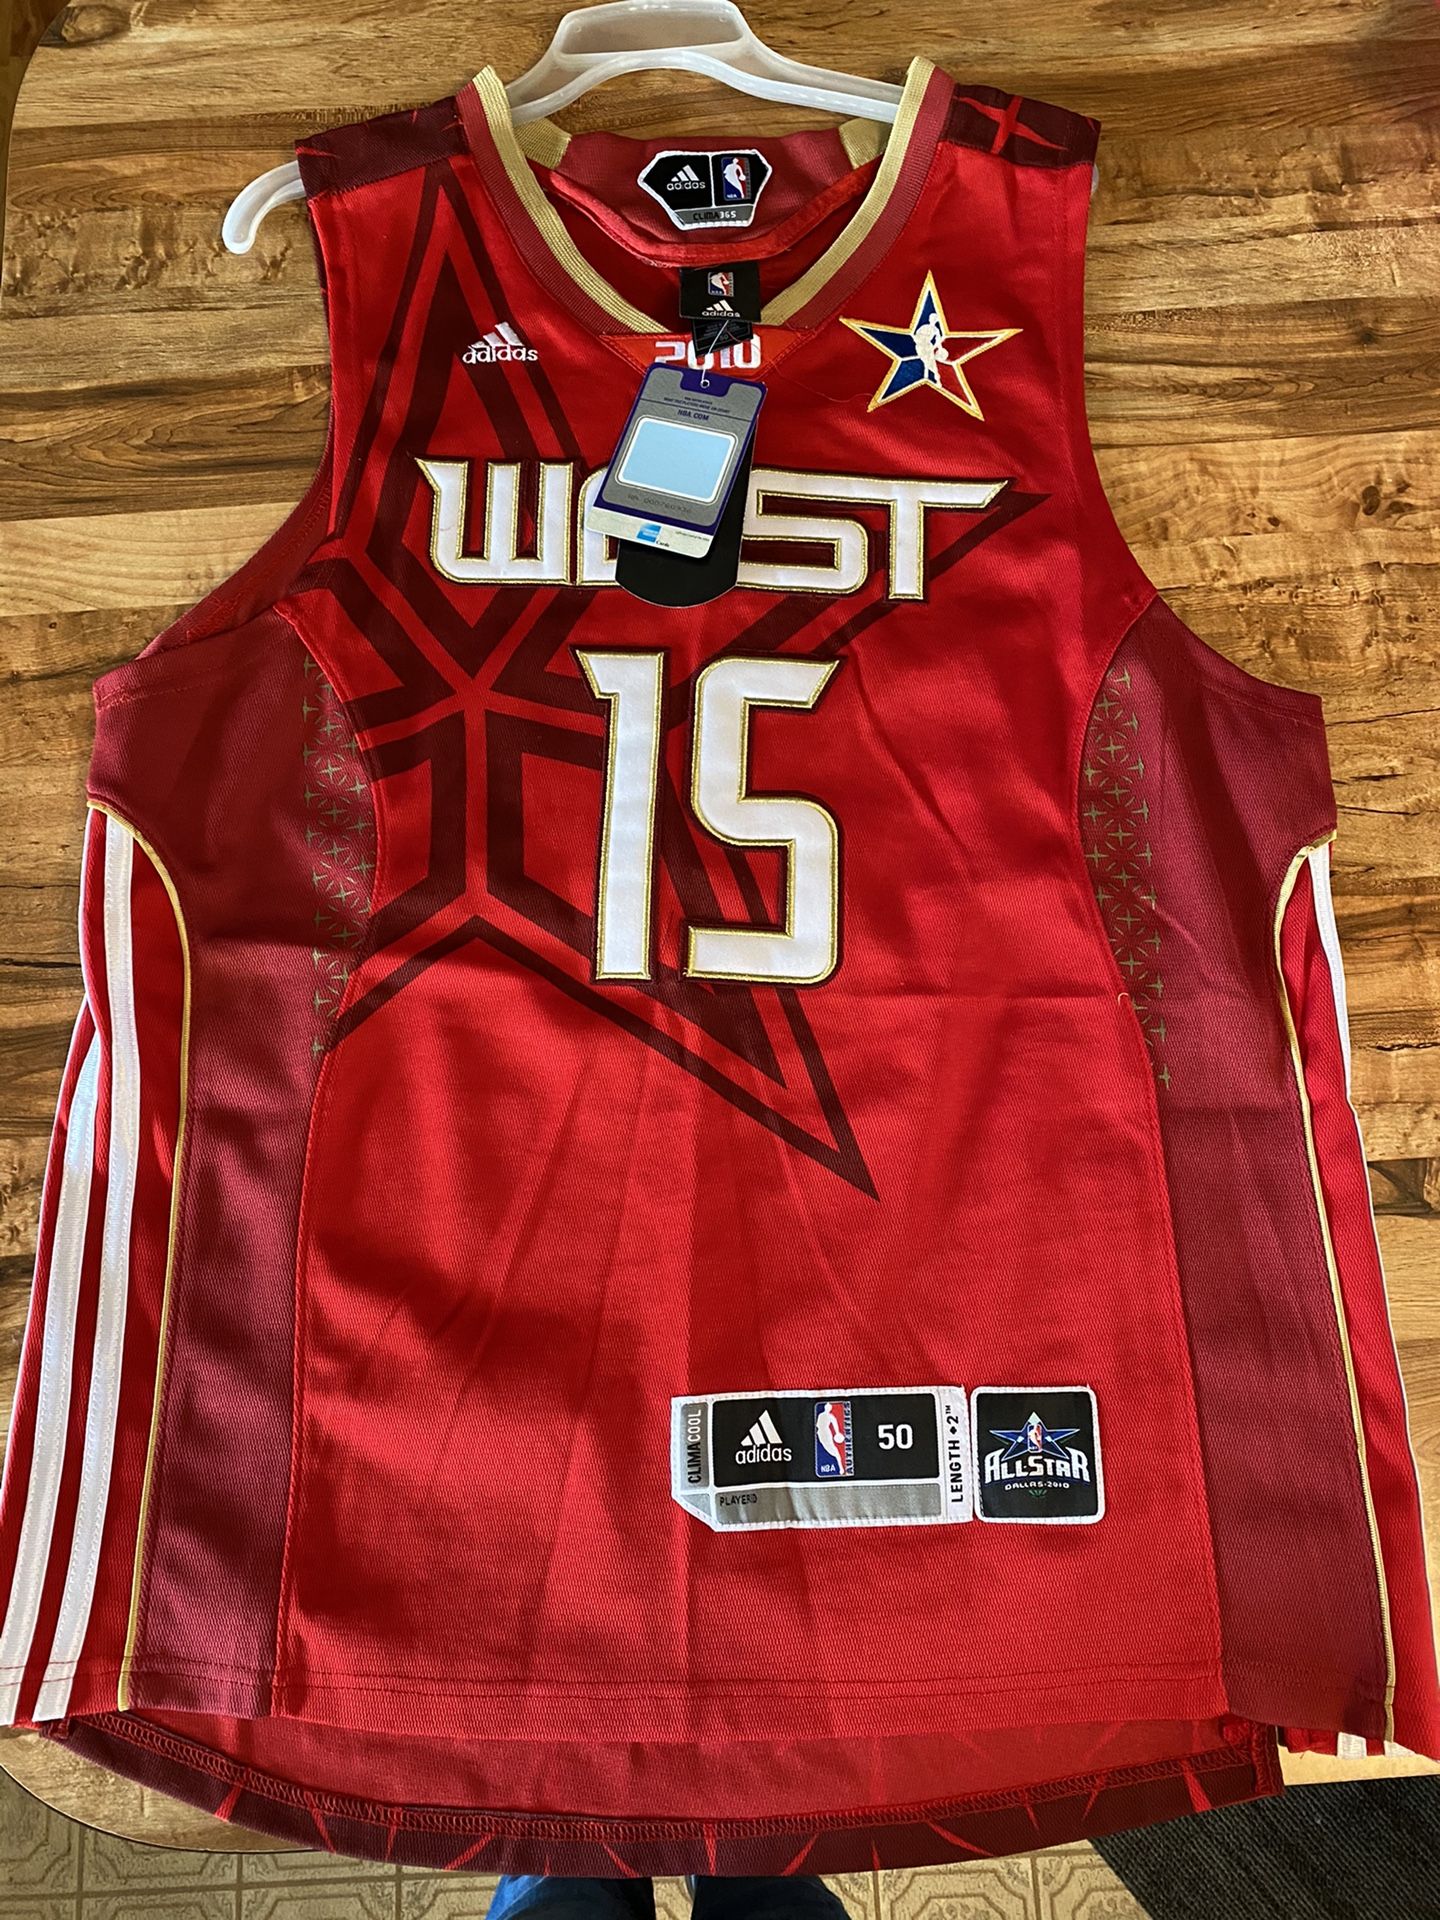 West-Anthony Jersey for Sale (Brand New)